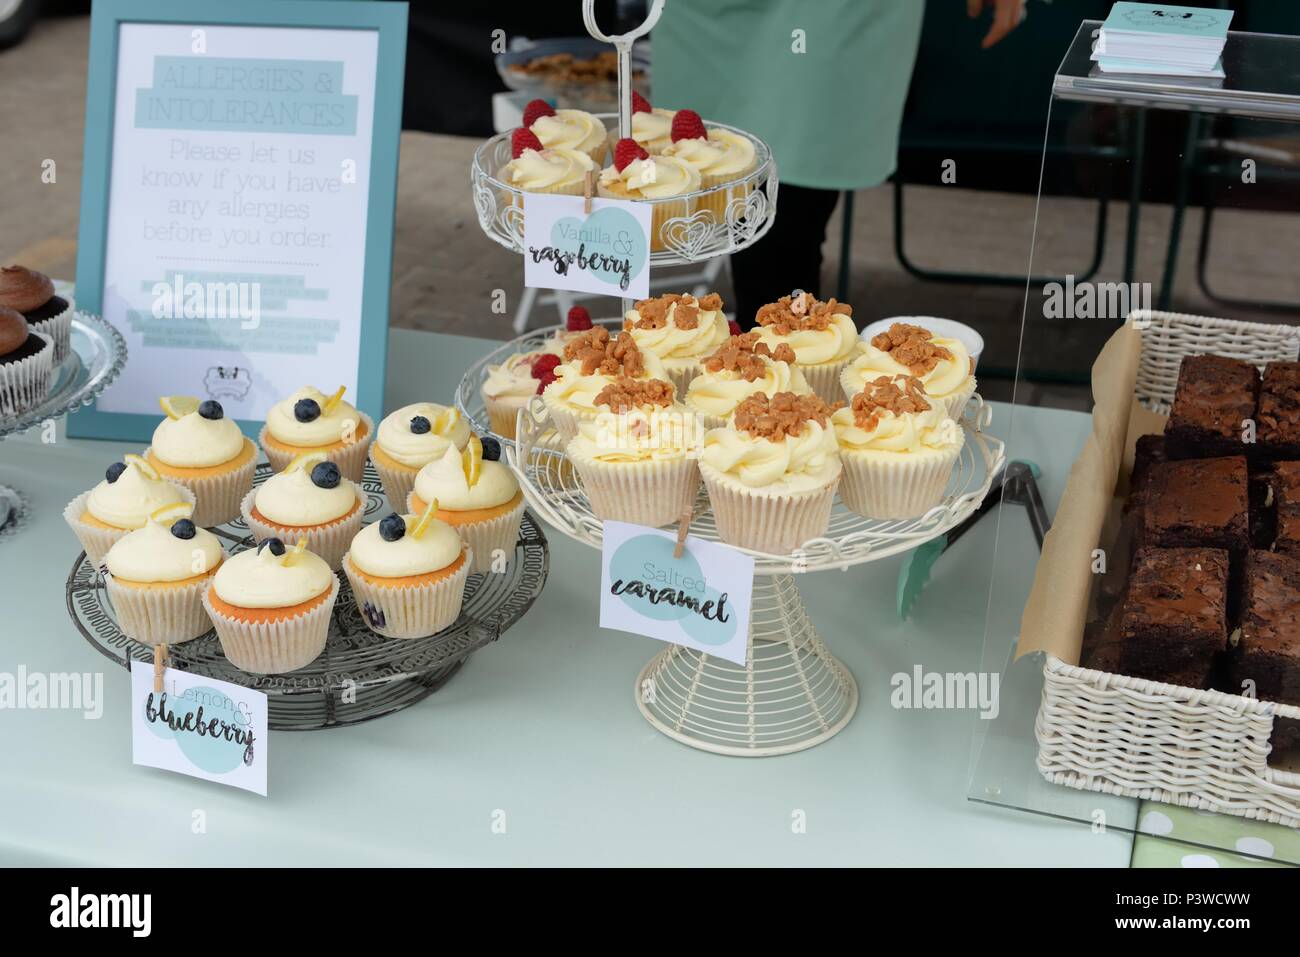 Cake stands at a local food fair in Portree, Skye, Scotland, with assorted fresh cupcakes and a notice warning of possible nut allergy contents. Stock Photo